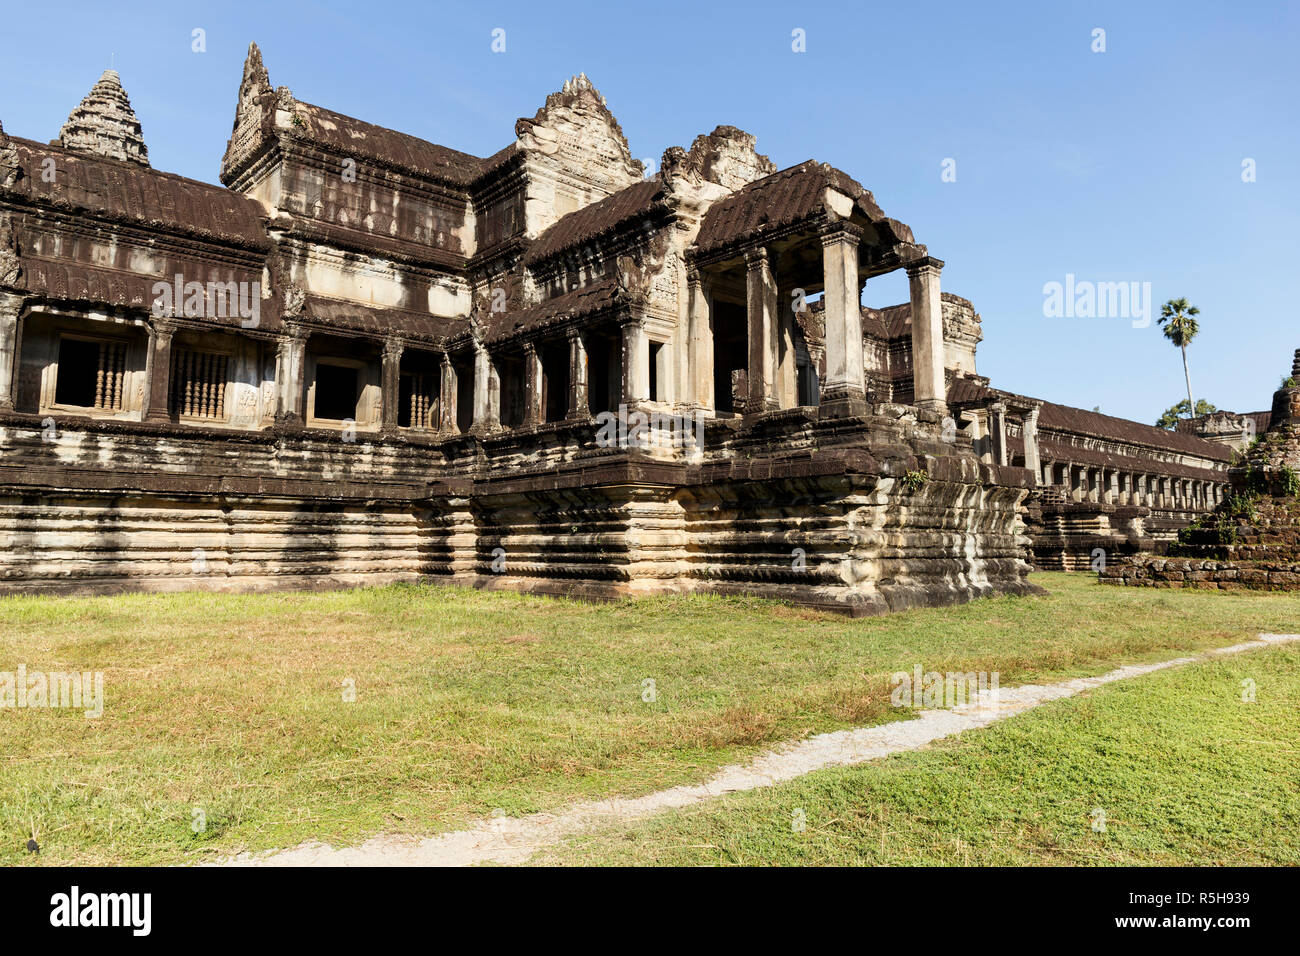 Angkor Wat Temple in Siem Reap, Cambodia Stock Photo